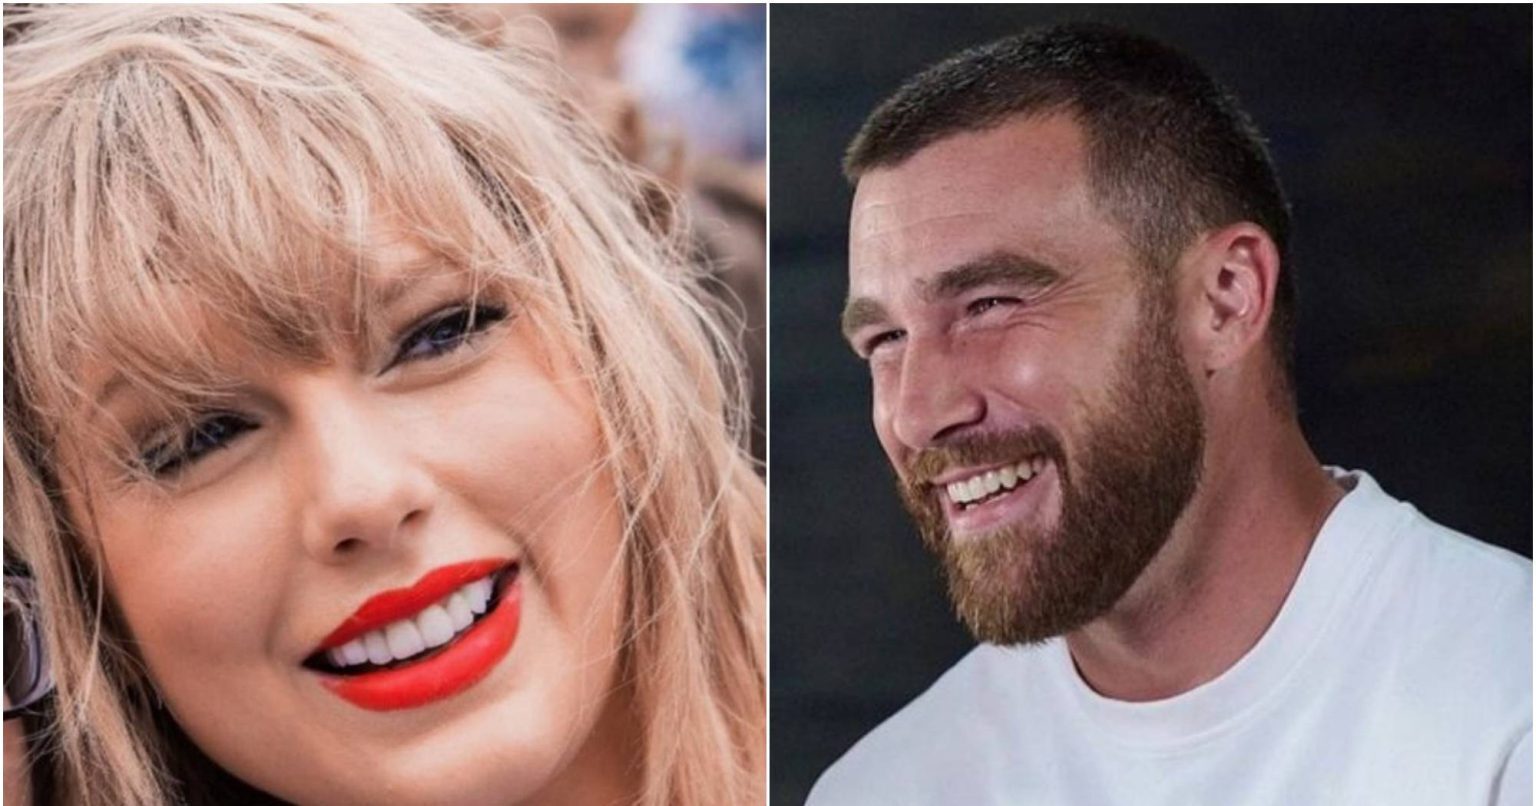 Chiefs' Travis Kelce: The One Thing Keeping Him from Marrying Taylor Swift...And It's Not Her Fortune!